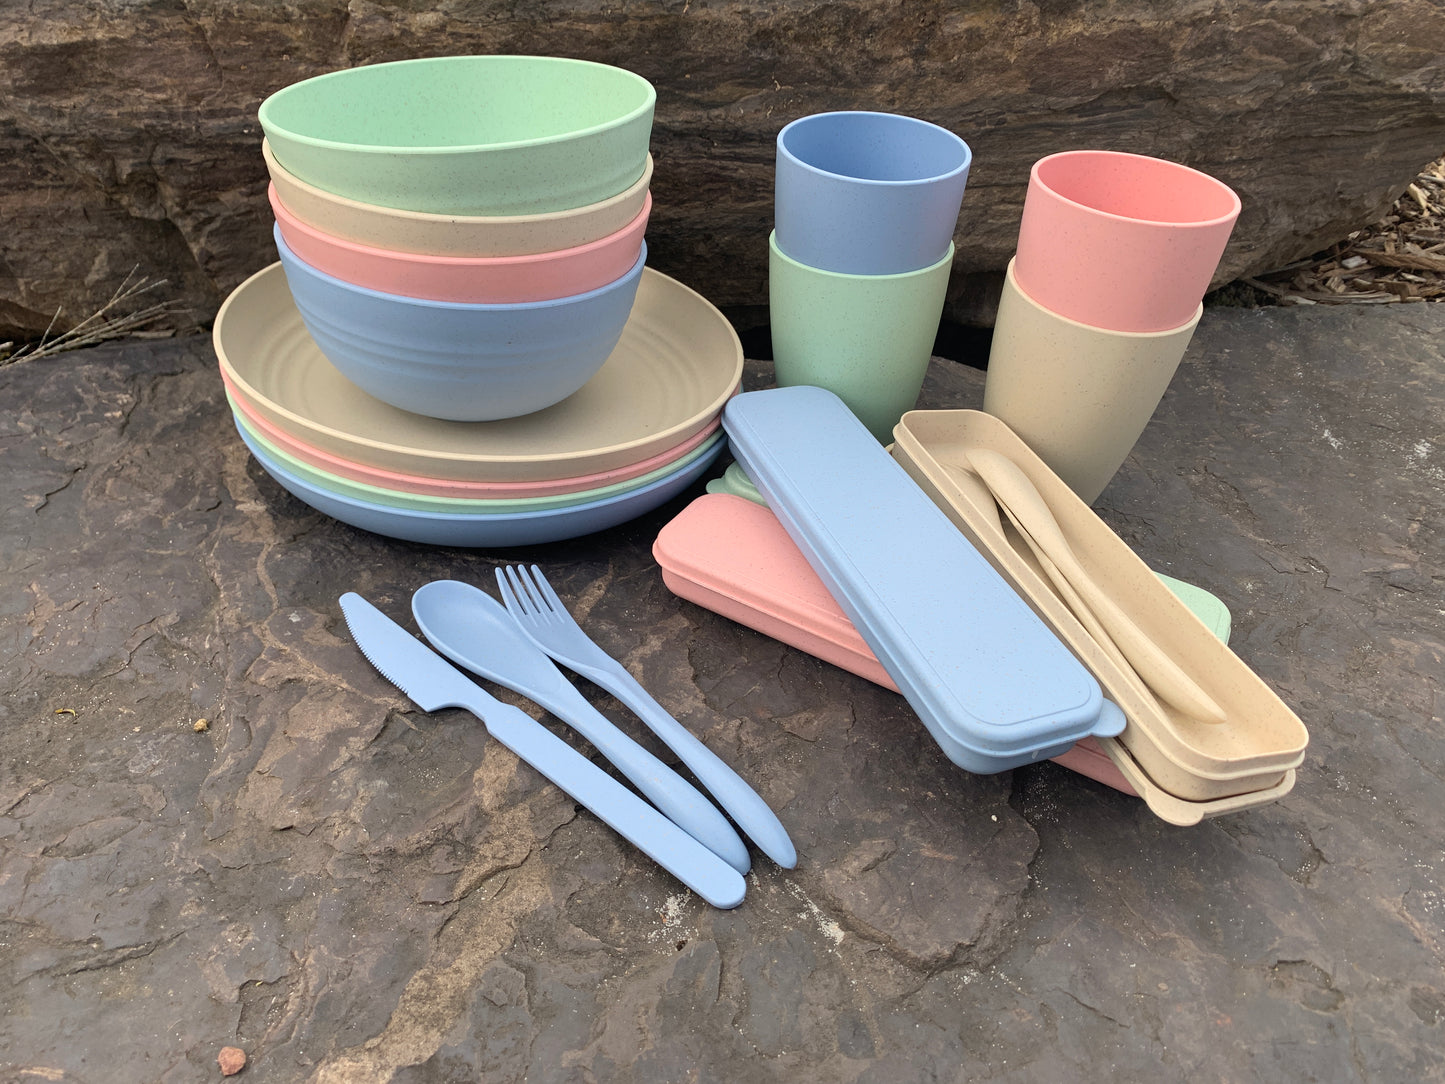 RV FACTORY NULLABOR DINNERWARE COLLECTION